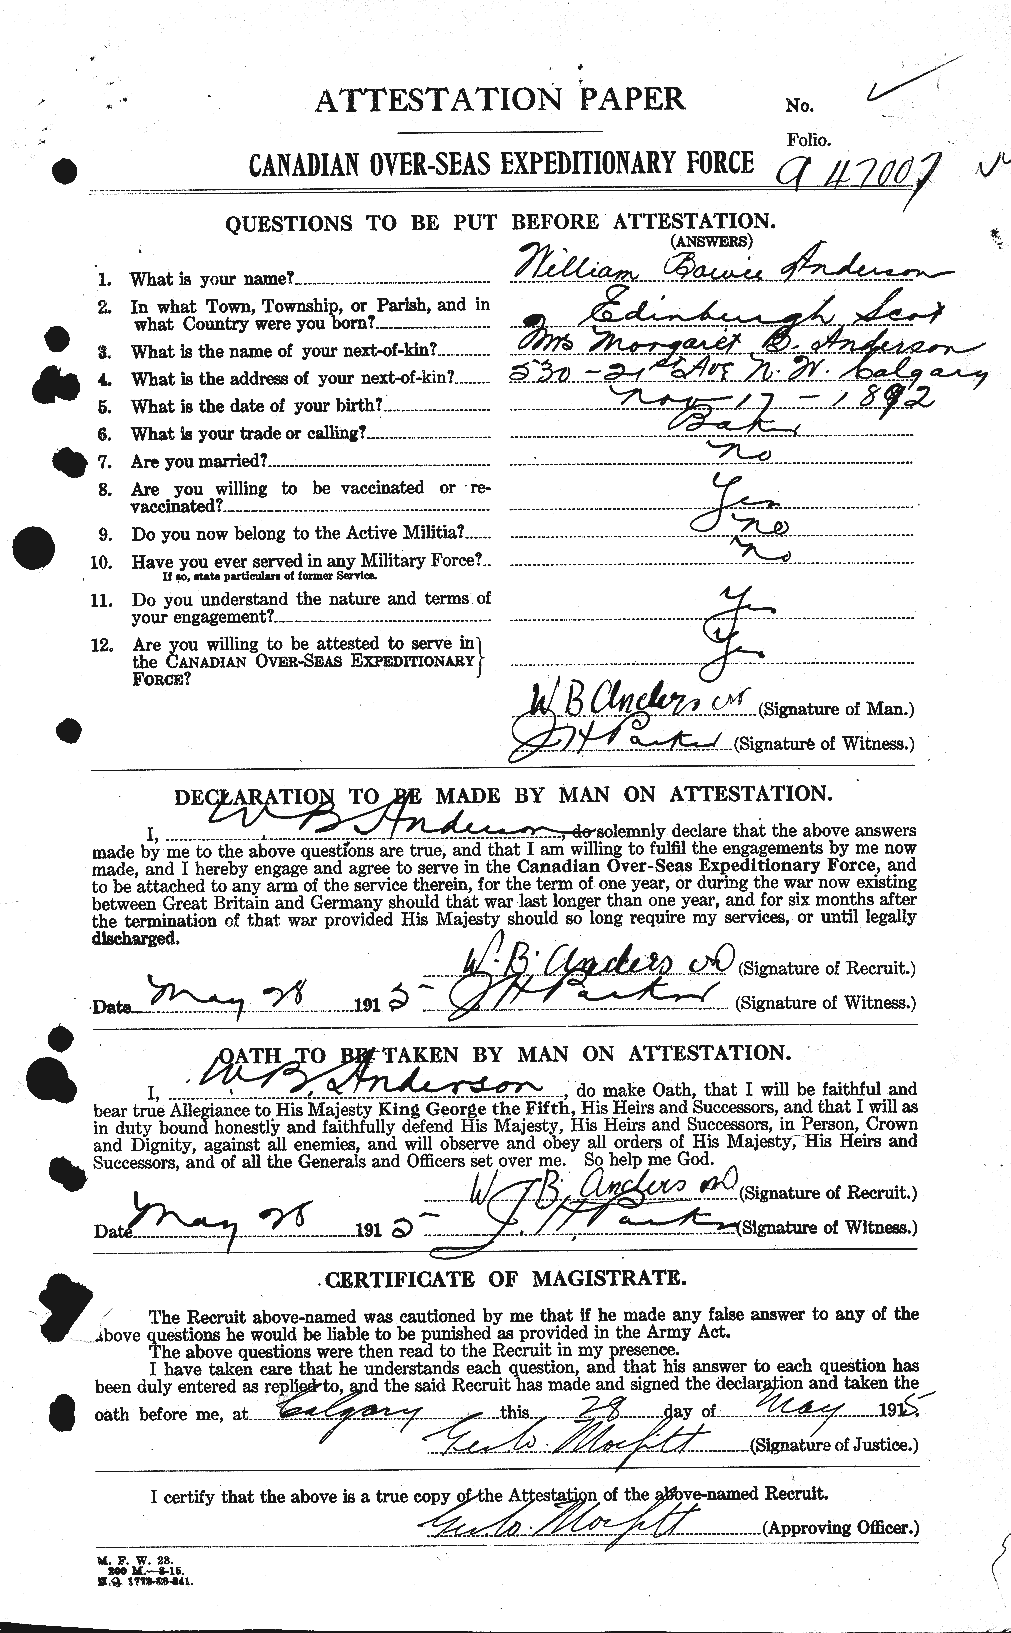 Personnel Records of the First World War - CEF 210778a